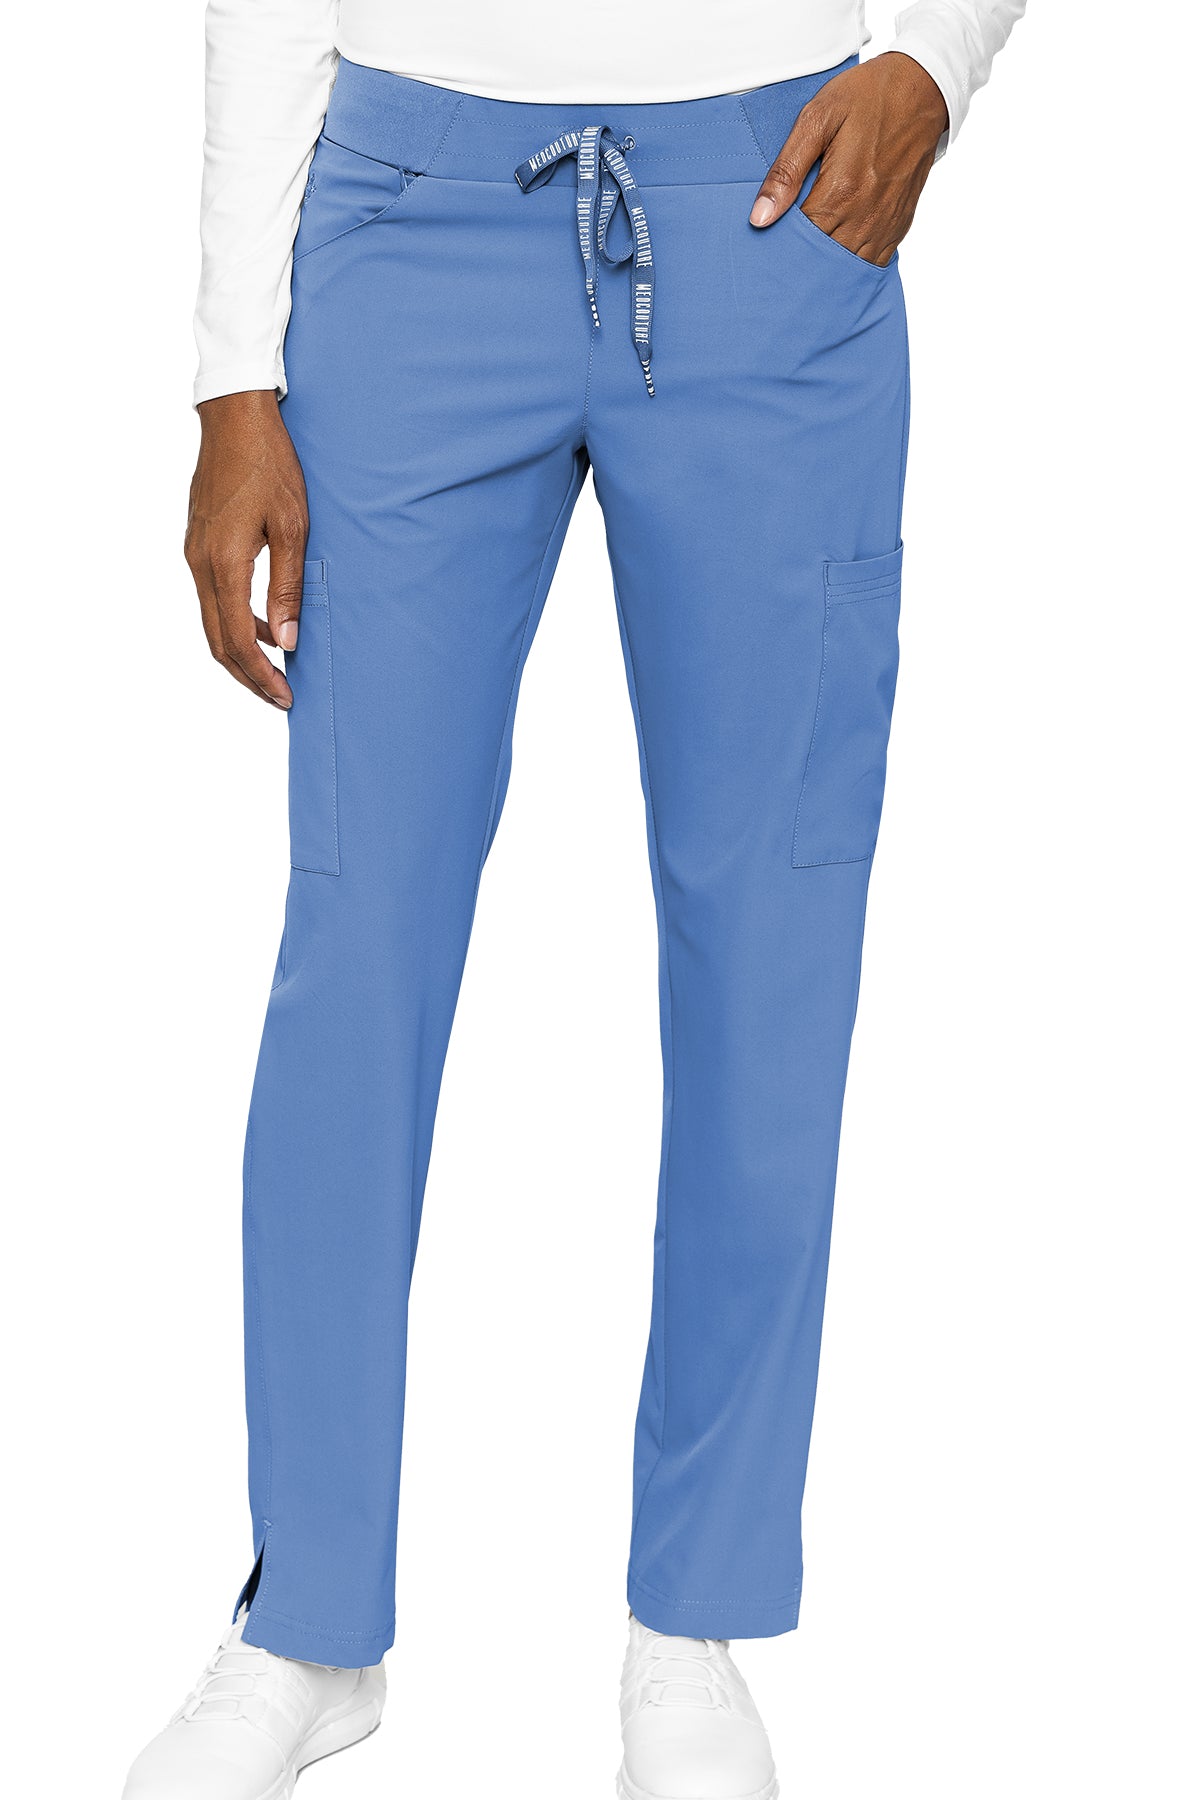 Med Couture Peaches Mid Rise Tapered Leg 4 Pocket Seamed Jogger